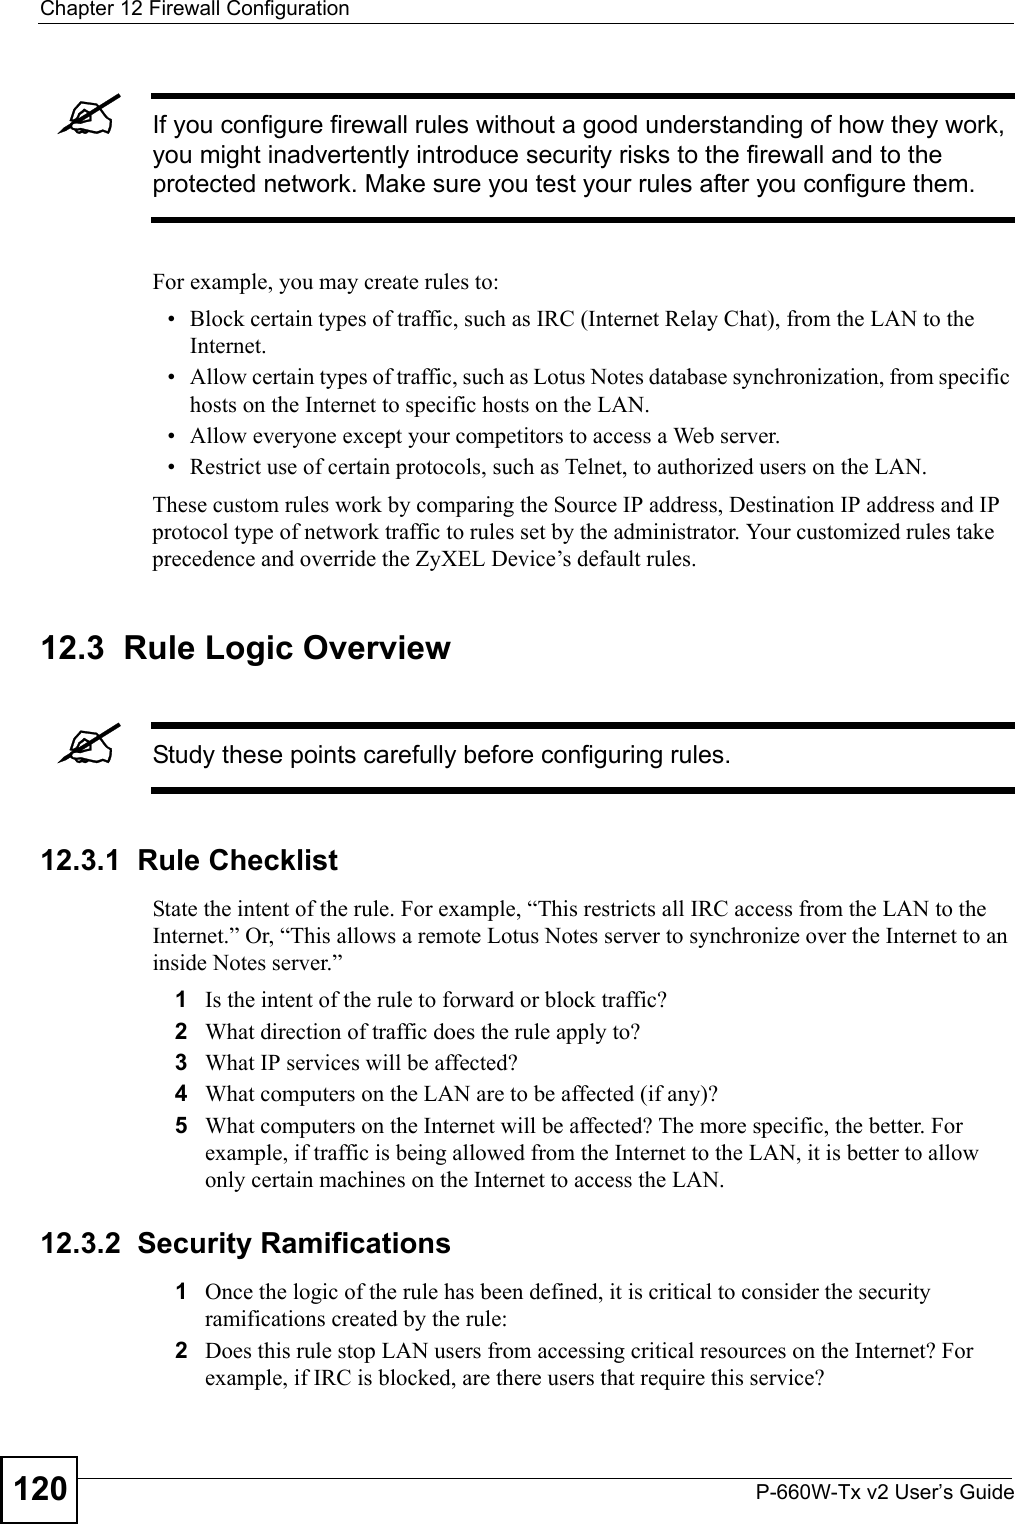 Chapter 12 Firewall ConfigurationP-660W-Tx v2 User’s Guide120&quot;If you configure firewall rules without a good understanding of how they work, you might inadvertently introduce security risks to the firewall and to the protected network. Make sure you test your rules after you configure them.For example, you may create rules to:• Block certain types of traffic, such as IRC (Internet Relay Chat), from the LAN to the Internet.• Allow certain types of traffic, such as Lotus Notes database synchronization, from specific hosts on the Internet to specific hosts on the LAN.• Allow everyone except your competitors to access a Web server.• Restrict use of certain protocols, such as Telnet, to authorized users on the LAN.These custom rules work by comparing the Source IP address, Destination IP address and IP protocol type of network traffic to rules set by the administrator. Your customized rules take precedence and override the ZyXEL Device’s default rules. 12.3  Rule Logic Overview  &quot;Study these points carefully before configuring rules.12.3.1  Rule ChecklistState the intent of the rule. For example, “This restricts all IRC access from the LAN to the Internet.” Or, “This allows a remote Lotus Notes server to synchronize over the Internet to an inside Notes server.”1Is the intent of the rule to forward or block traffic?2What direction of traffic does the rule apply to?3What IP services will be affected?4What computers on the LAN are to be affected (if any)?5What computers on the Internet will be affected? The more specific, the better. For example, if traffic is being allowed from the Internet to the LAN, it is better to allow only certain machines on the Internet to access the LAN.12.3.2  Security Ramifications1Once the logic of the rule has been defined, it is critical to consider the security ramifications created by the rule:2Does this rule stop LAN users from accessing critical resources on the Internet? For example, if IRC is blocked, are there users that require this service?